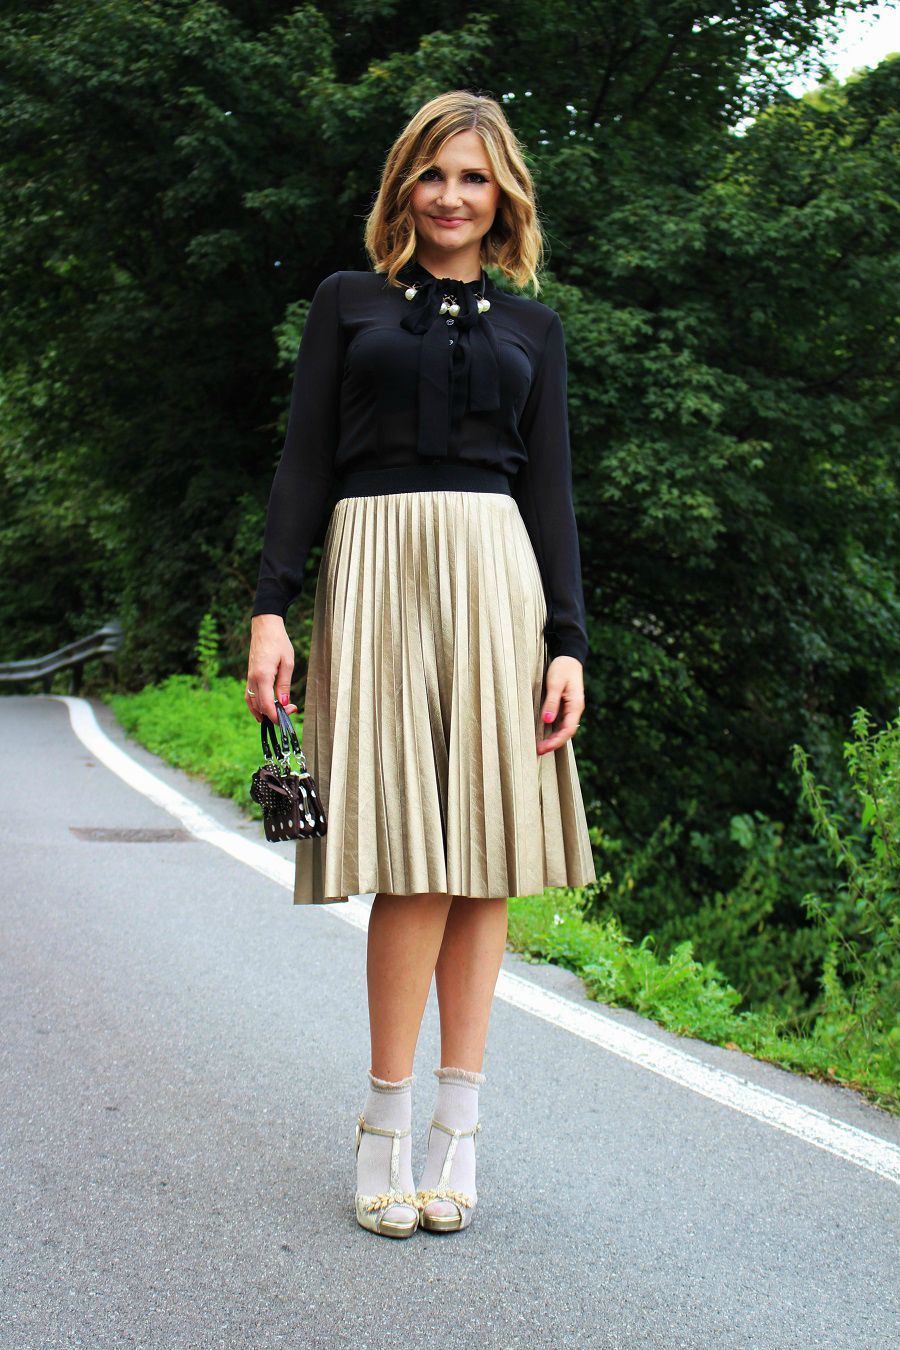 Marvelous Pleated Skirt Outfits For Fashionistas - Ohh My My